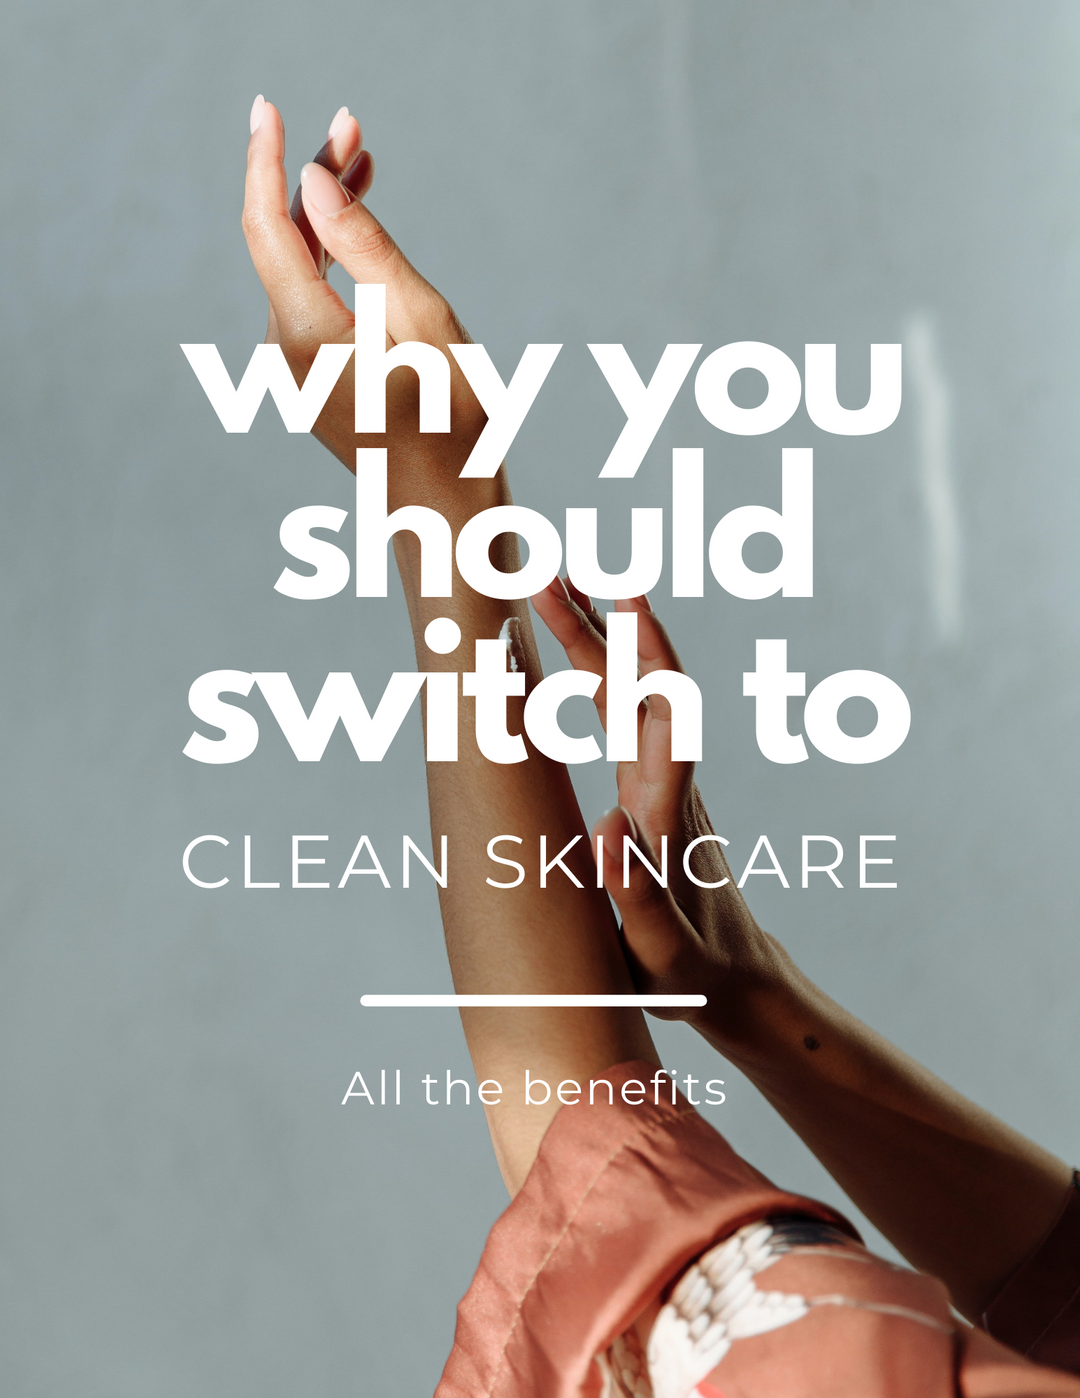 Why you should switch to clean skincare products?